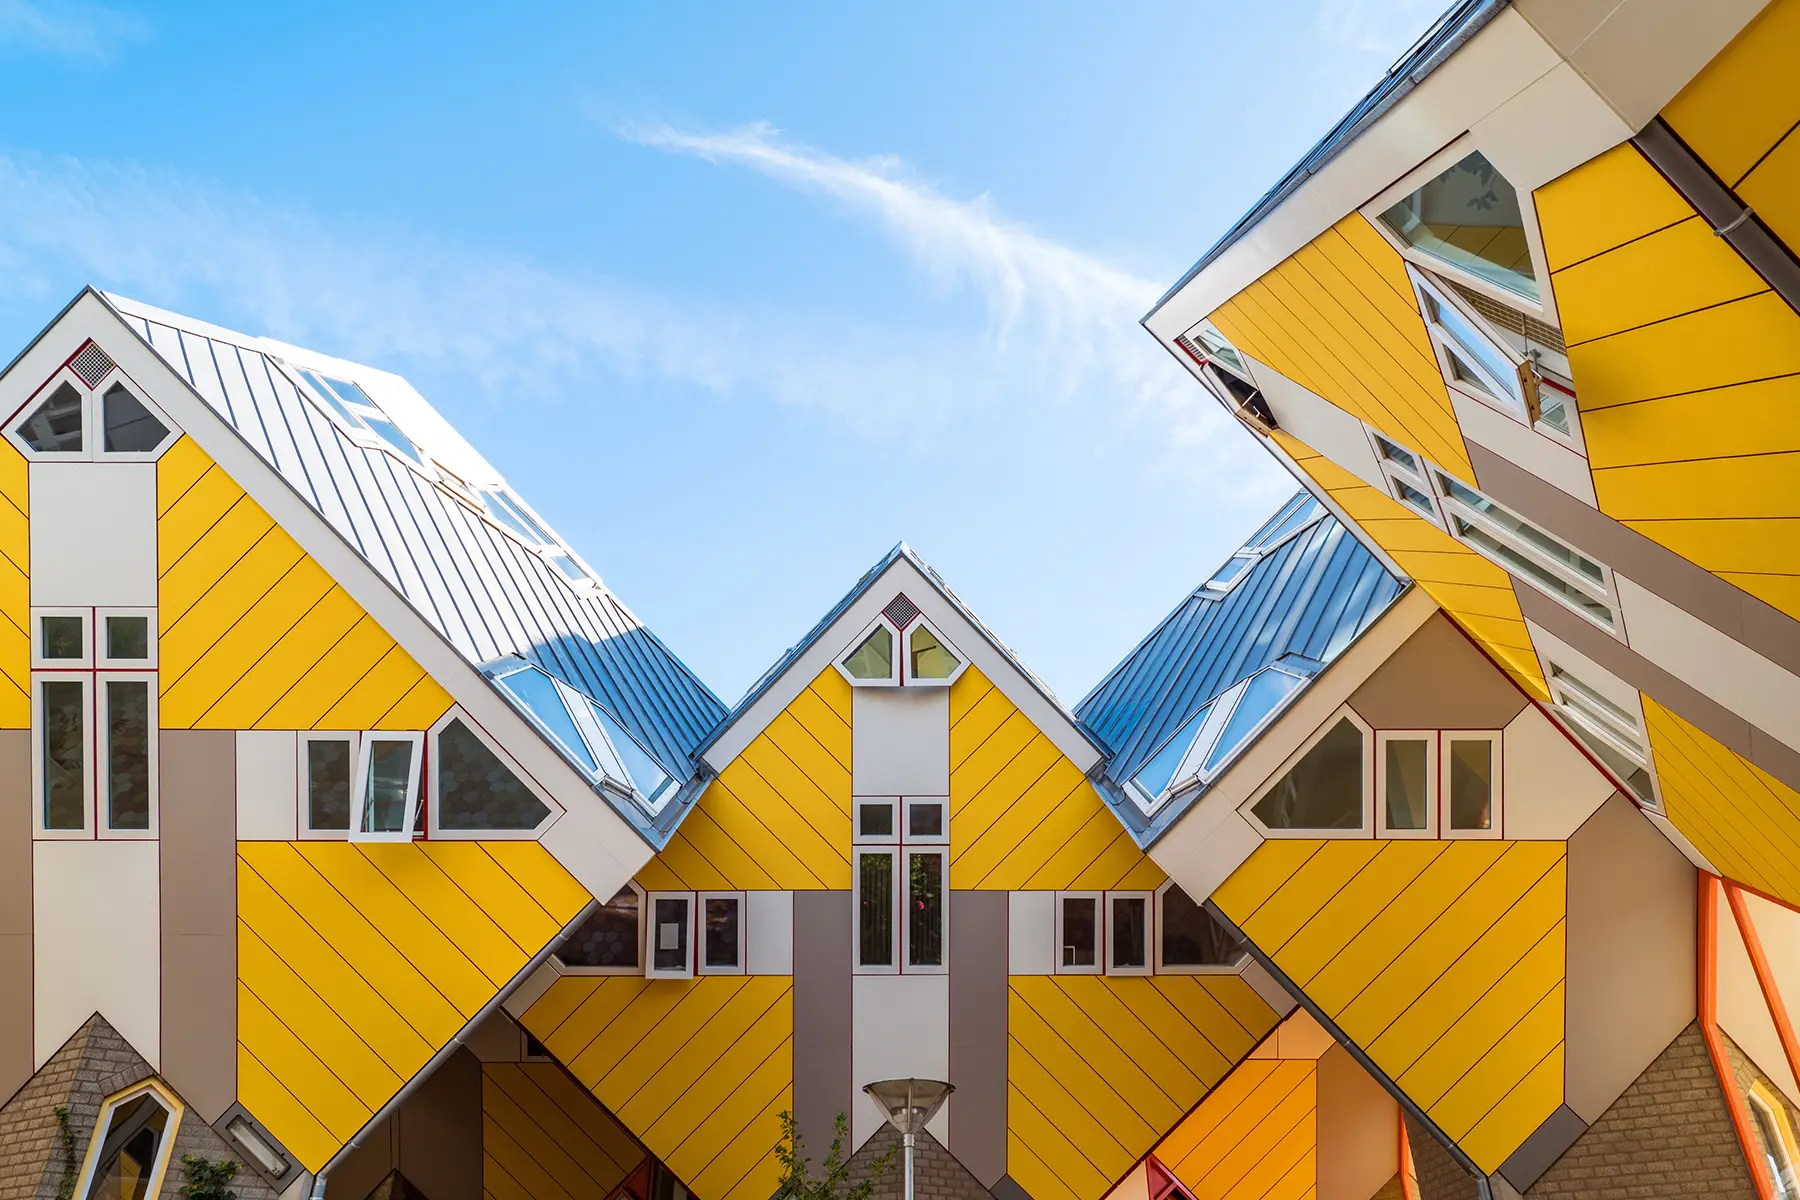 The yellow Cube Houses in Rotterdam, Netherlands